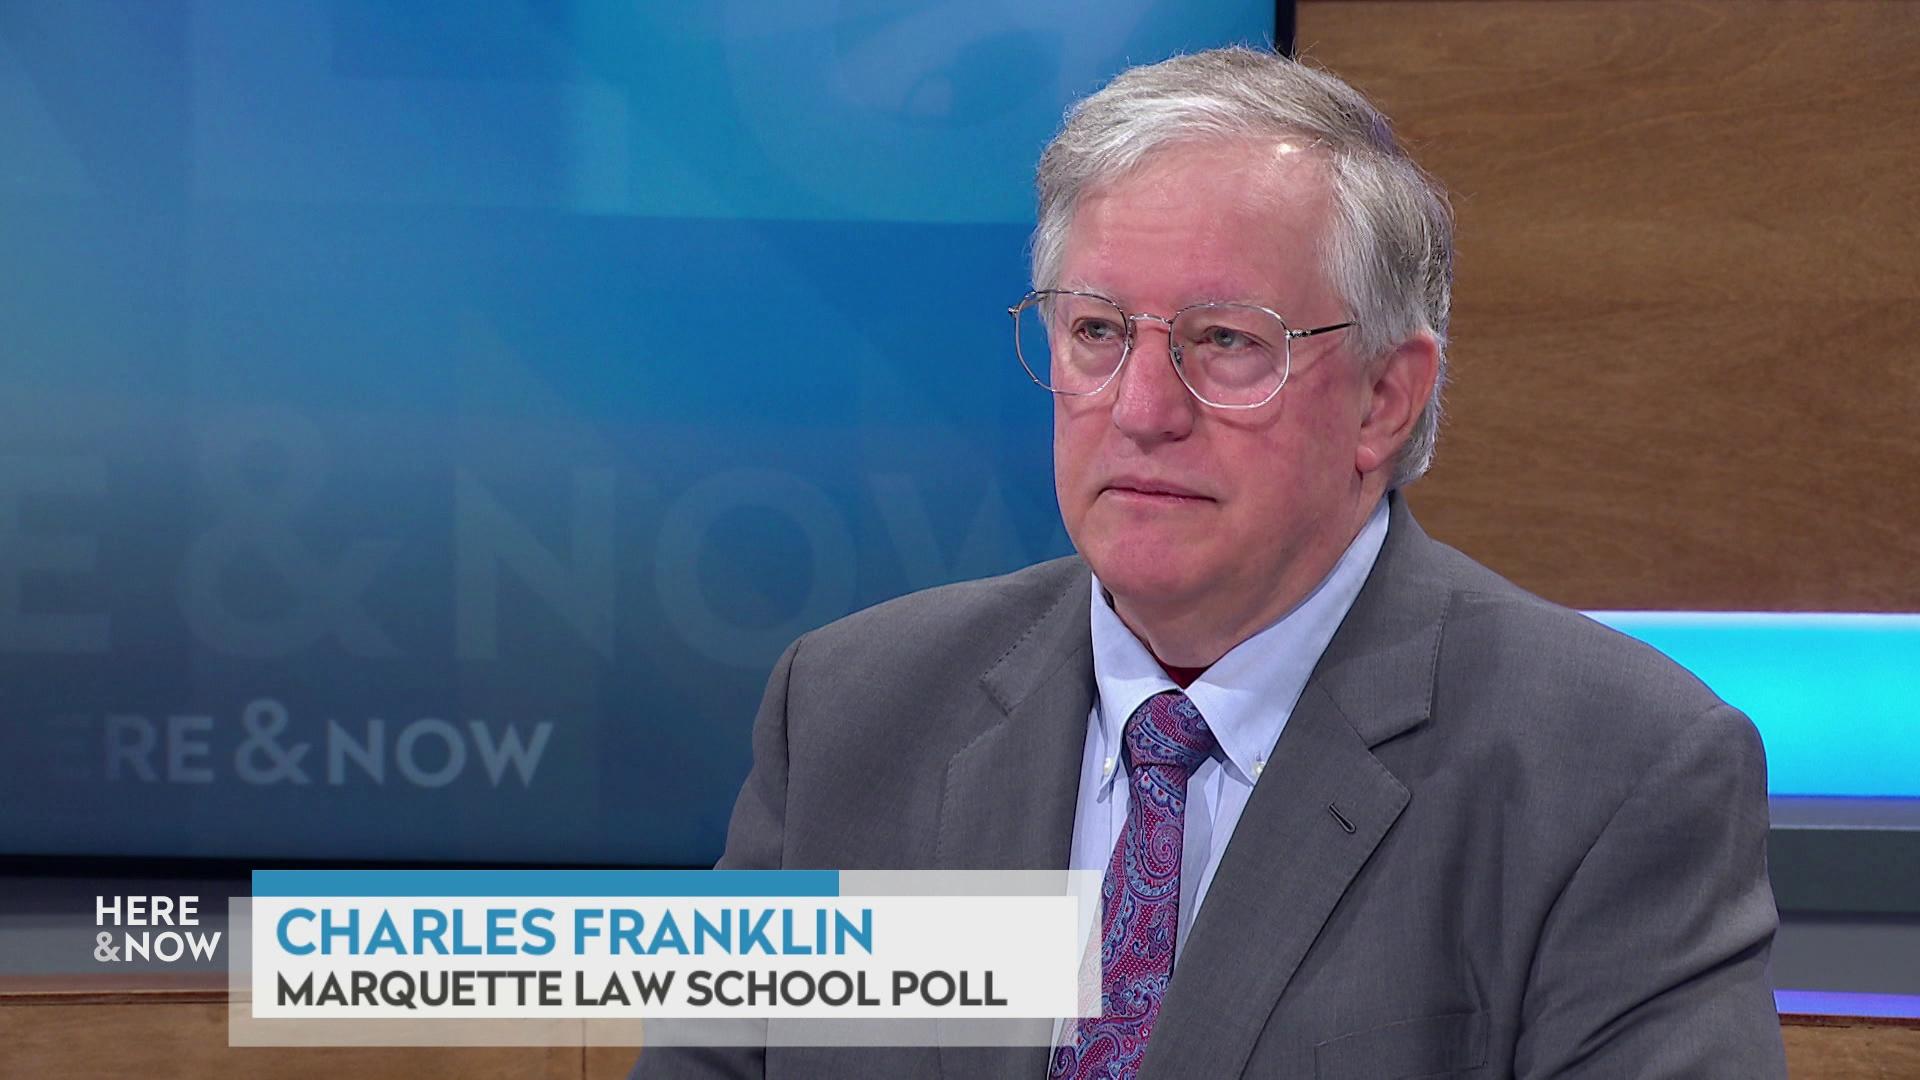 A still image shows Charles Franklin seated at the 'Here & Now' set featuring wood paneling, with a graphic at bottom reading 'Charles Franklin' and 'Marquette Law School Poll.'